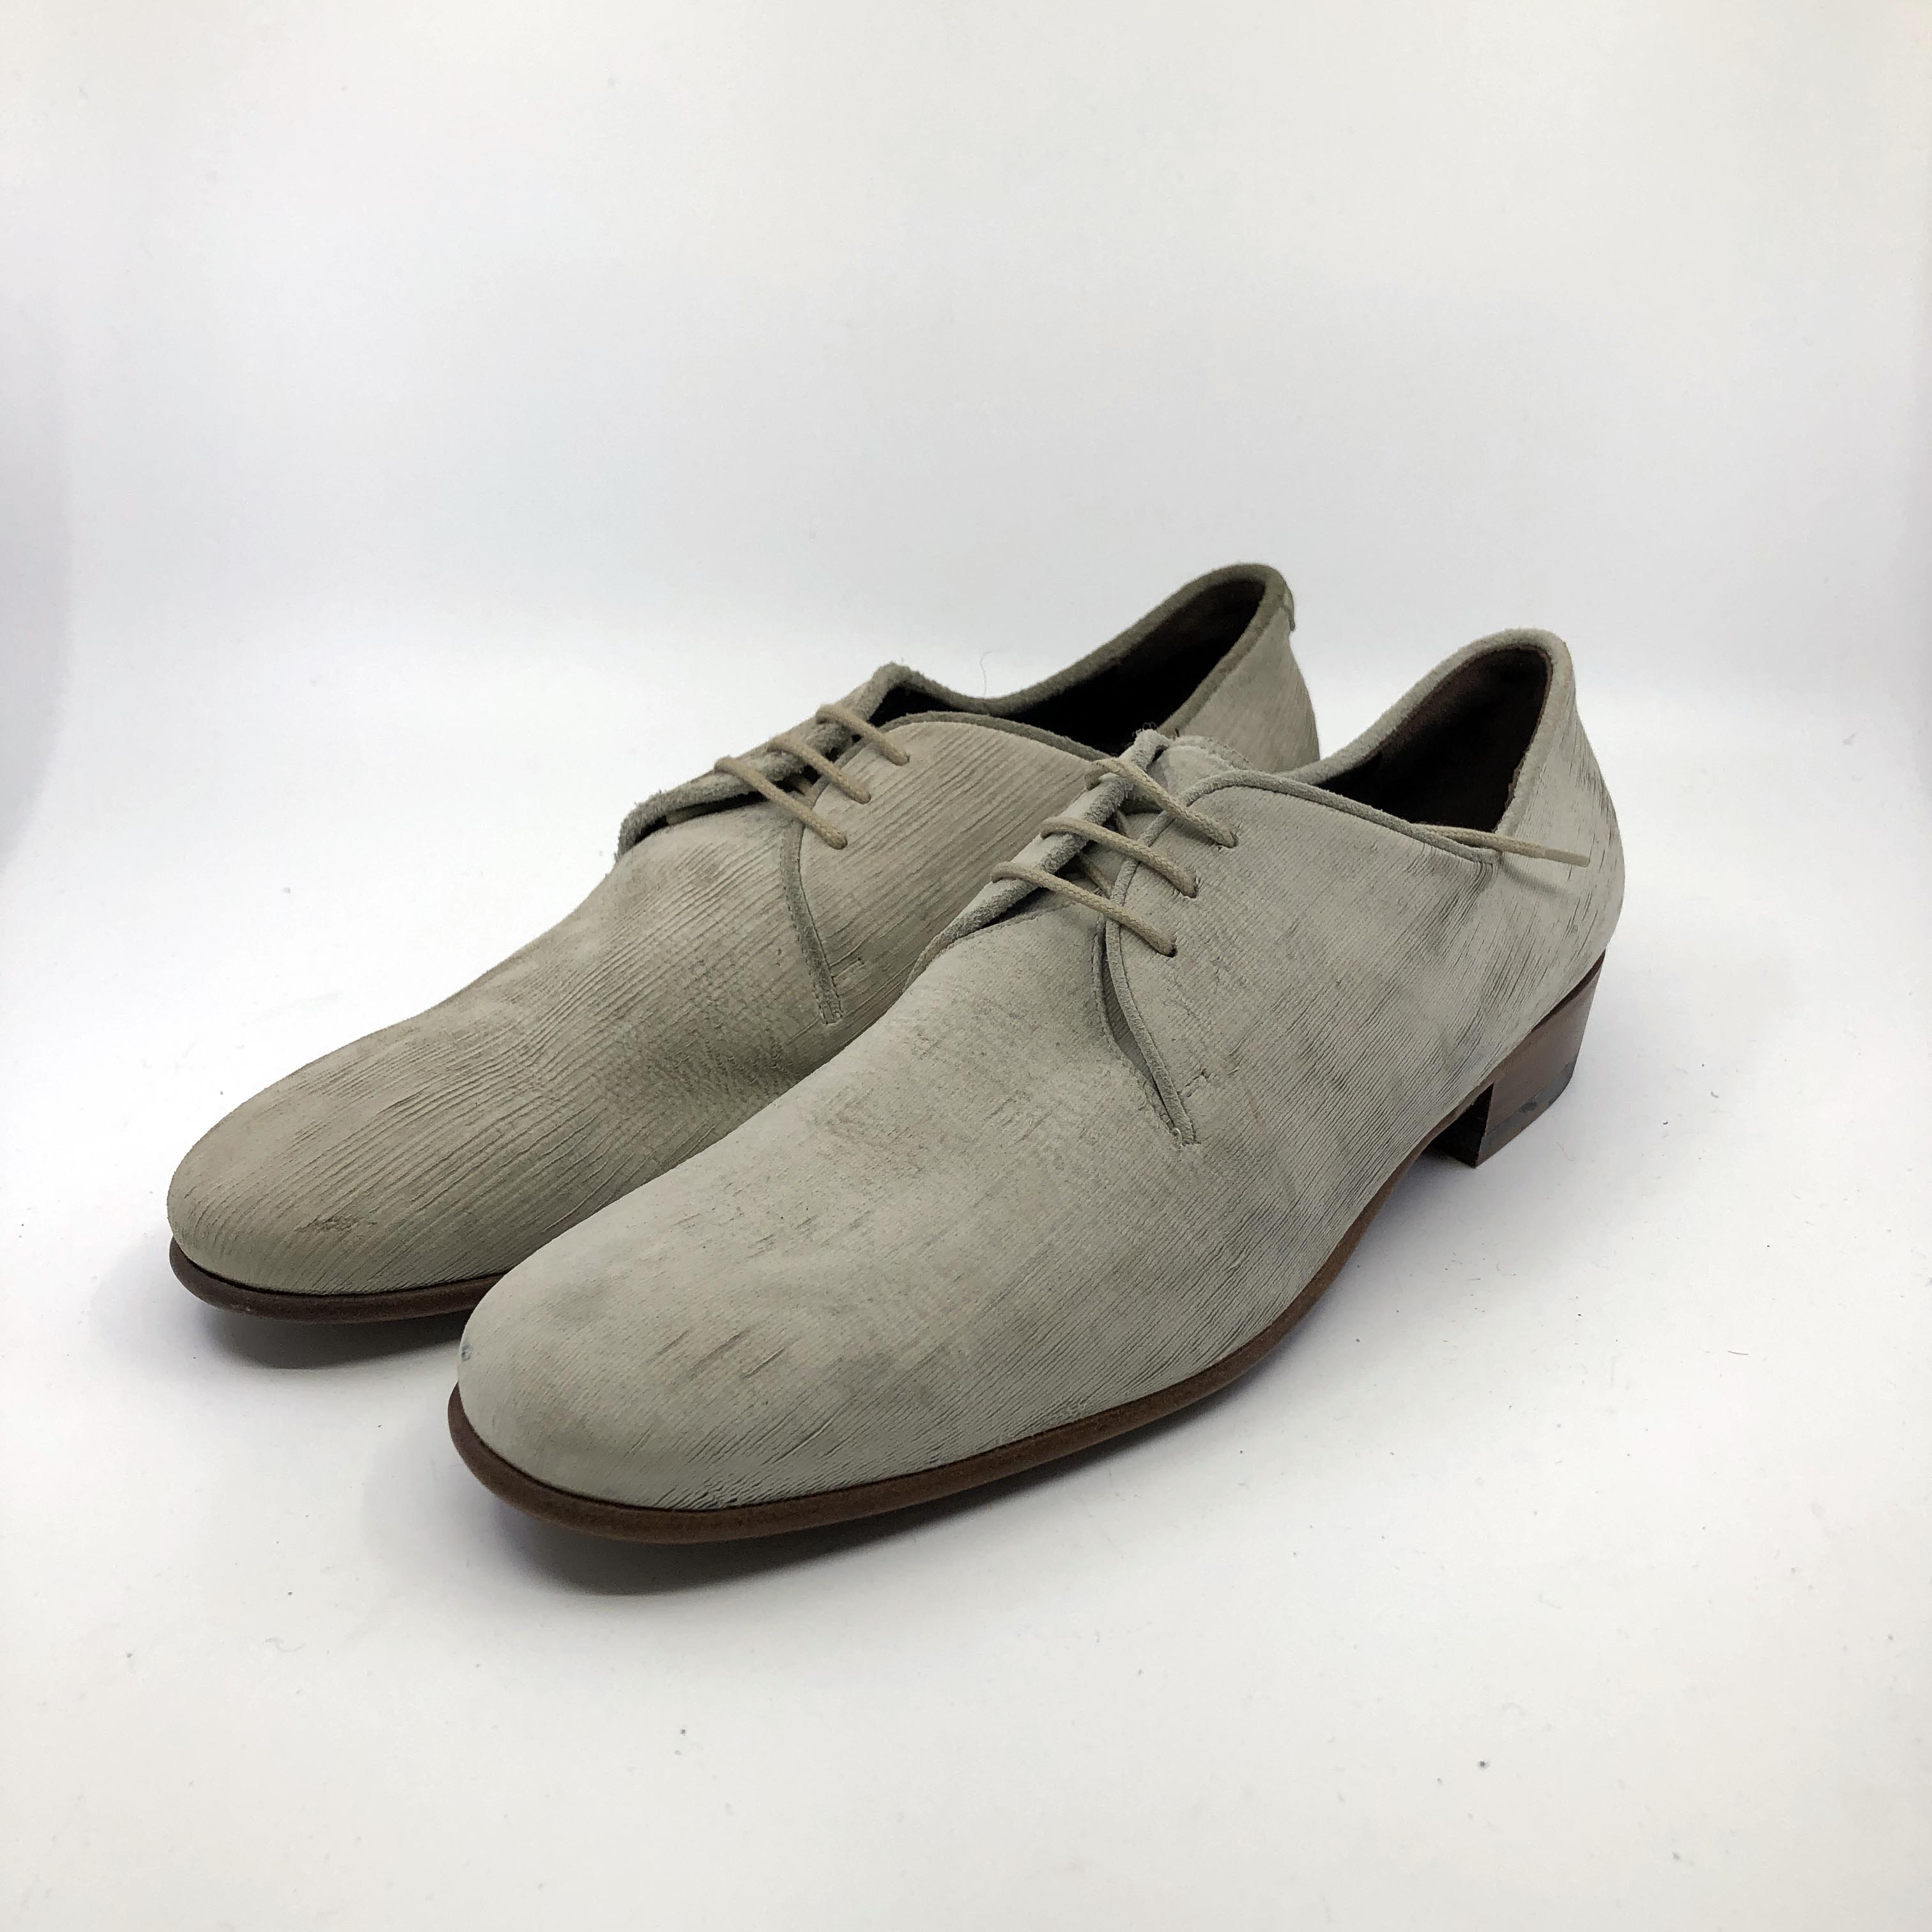 [Lanvin] Laced Up Derby Leather shoes - Size 8